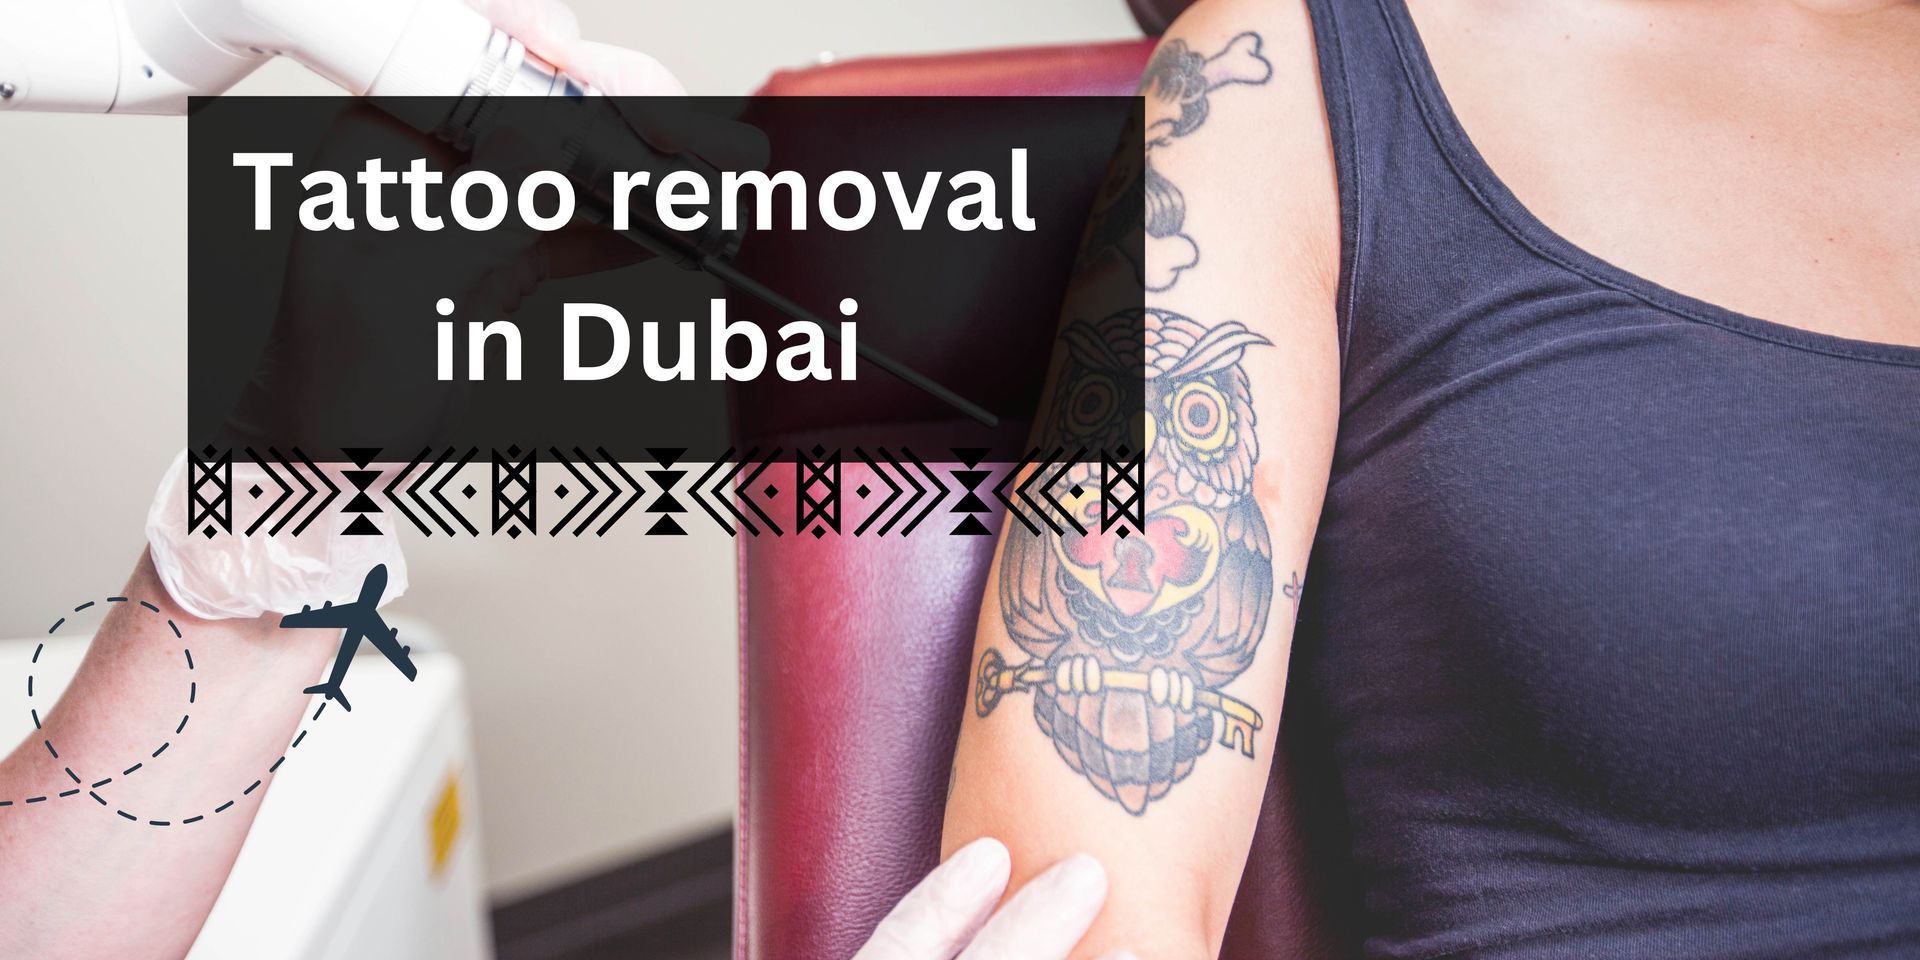 We Are The 1 Laser Tattoo Removal Clinic in Vancouver